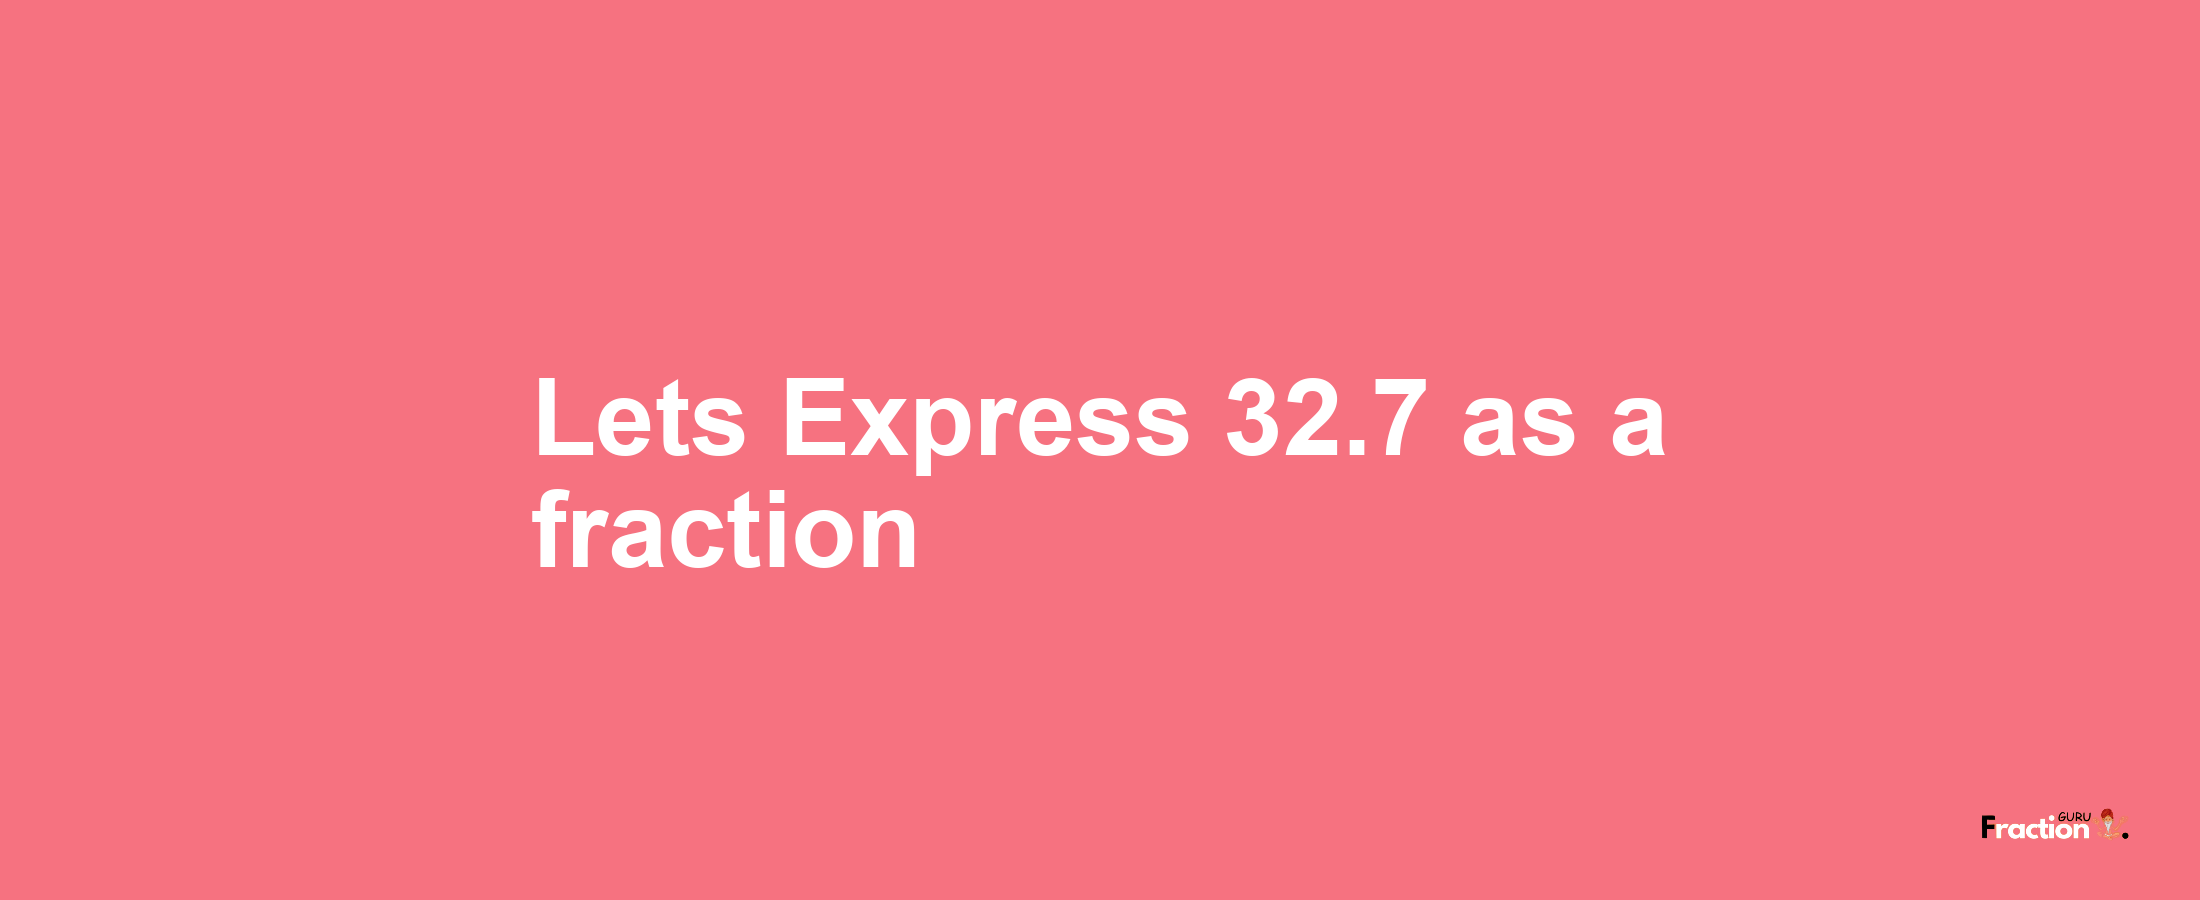 Lets Express 32.7 as afraction